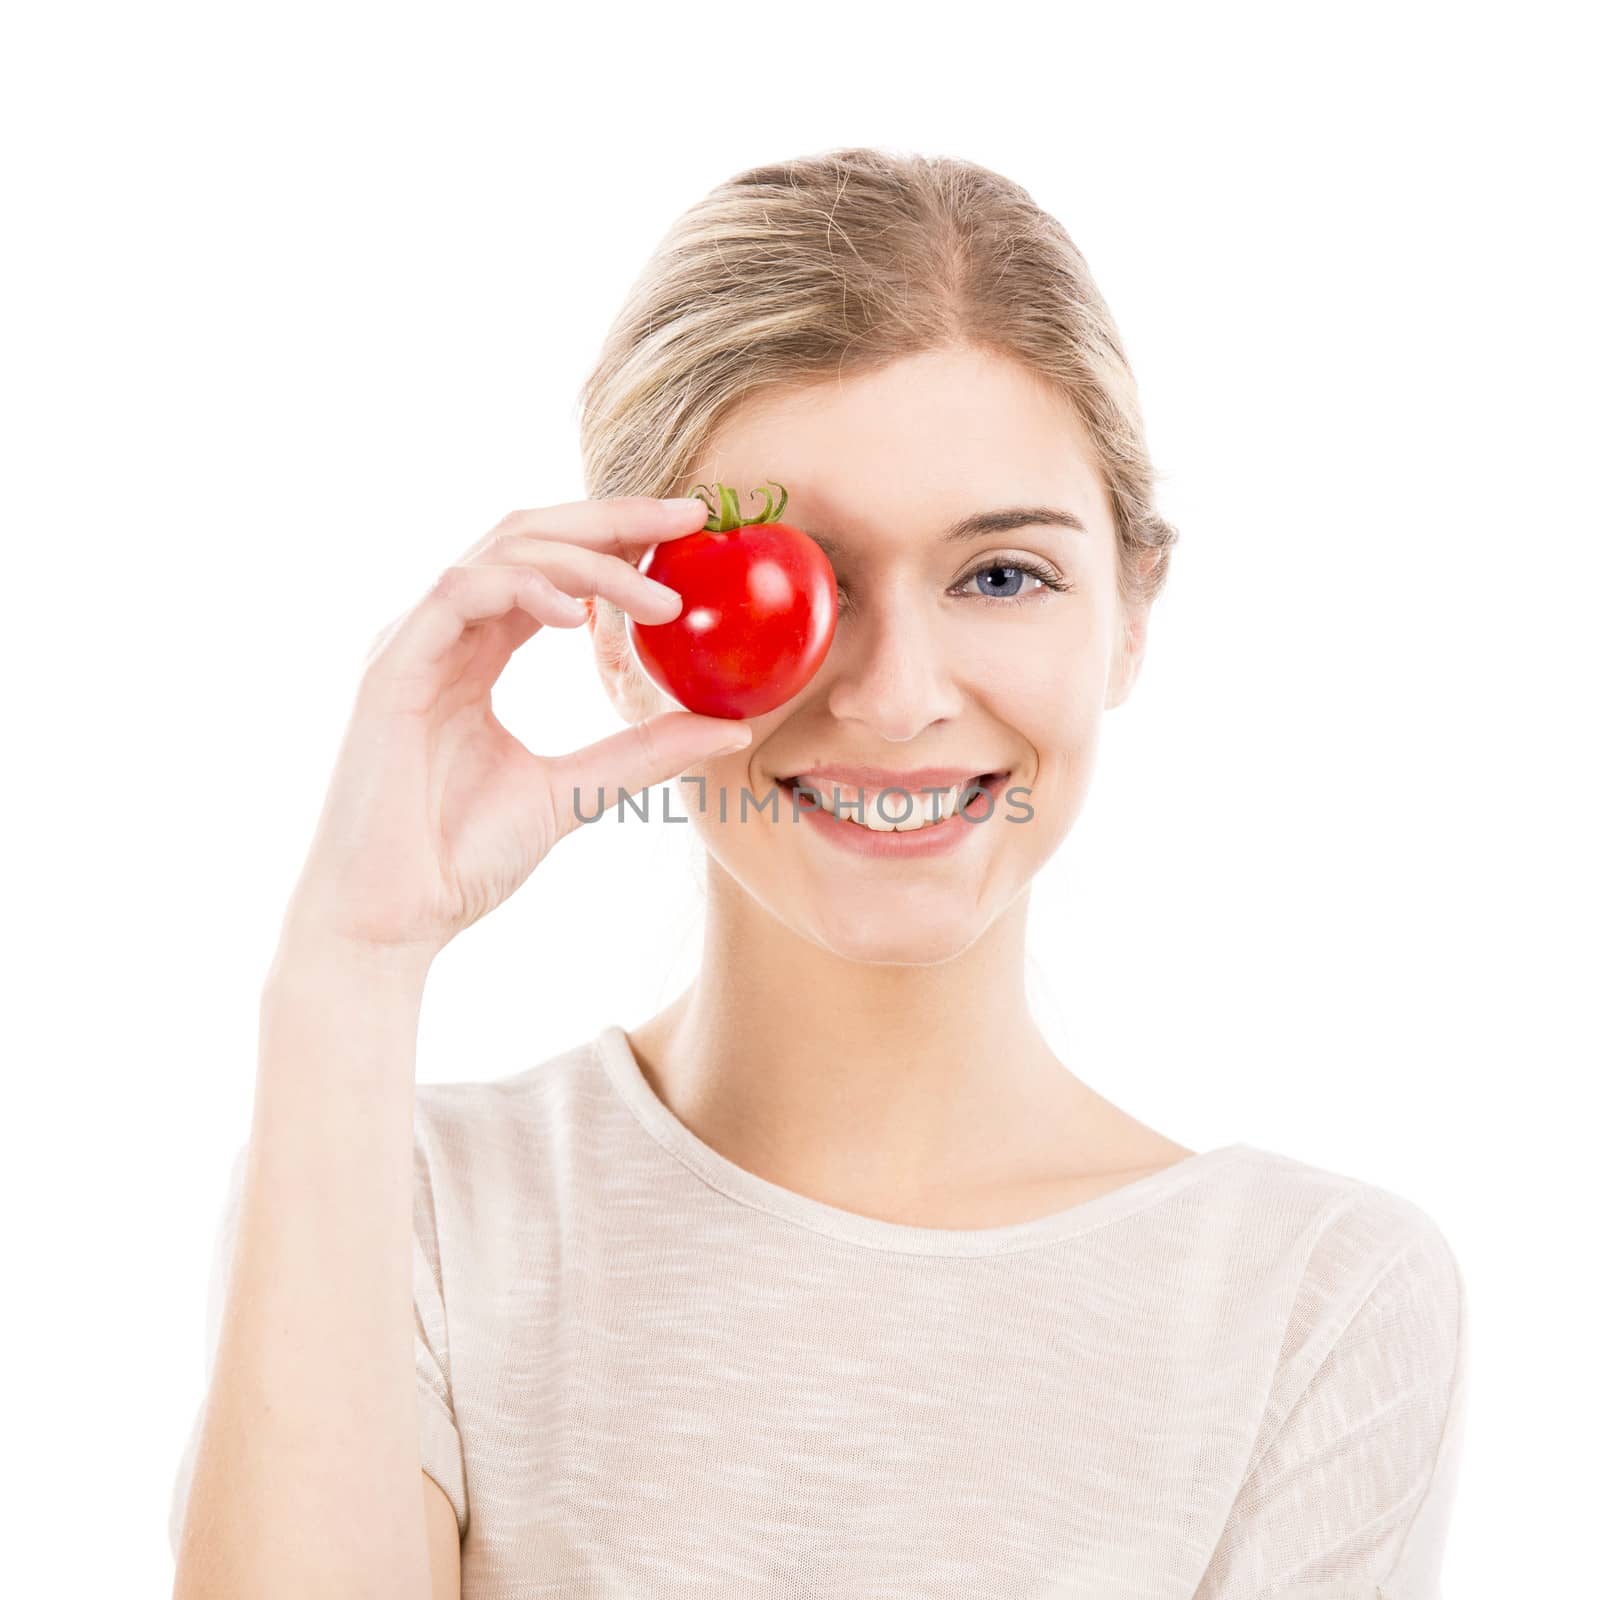 Beautiful girl smiling and holding a red tomato in front of the right eye, isolated over a white background